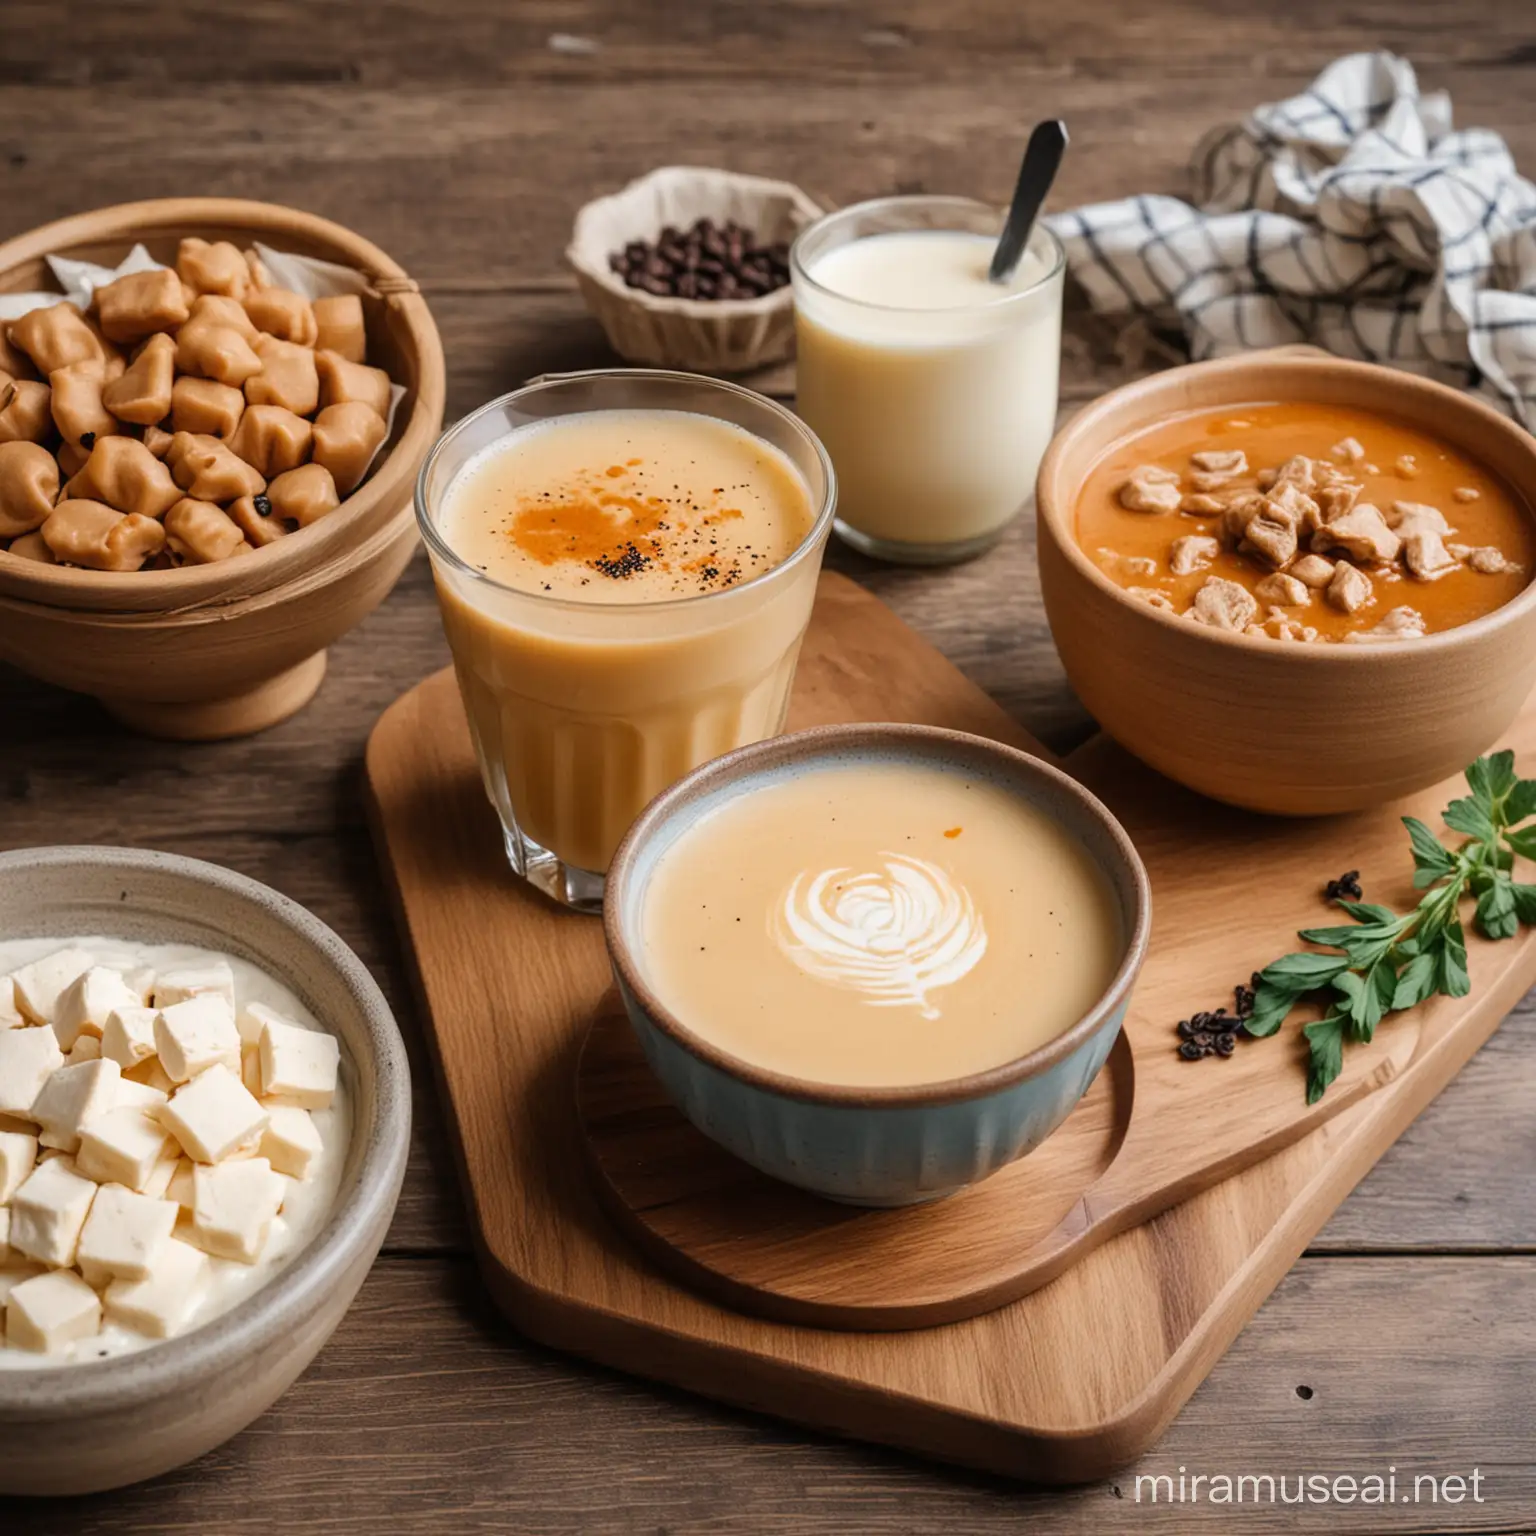 Traditional Mongolian Milk Tea and Ethnic Foods on Wooden Cutting Board